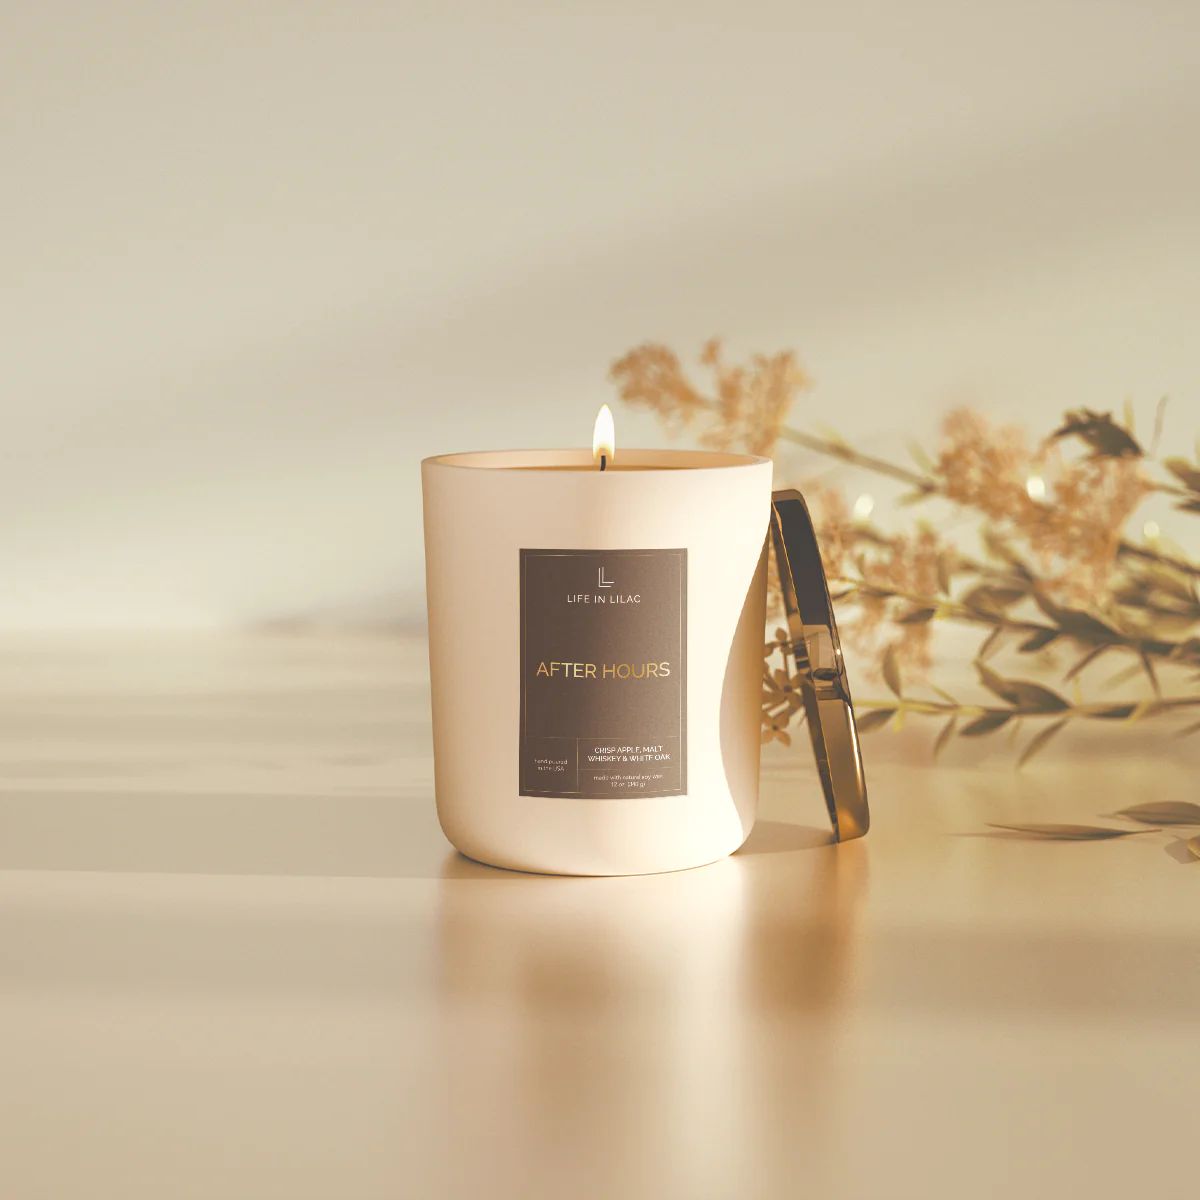 After Hours Candle - Ships Friday Sept 18th | Life In Lilac